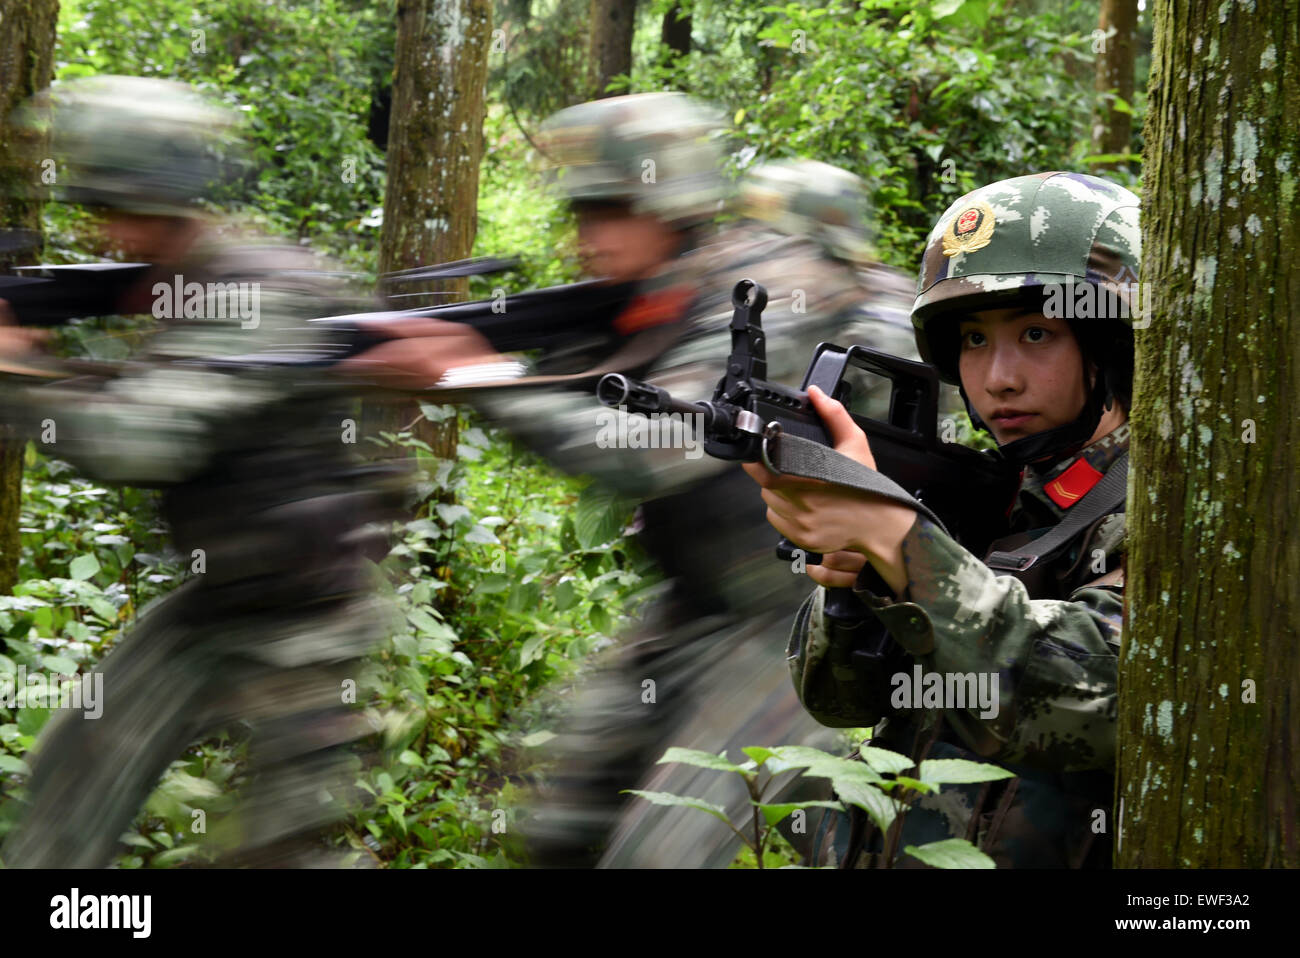 (150625) -- DEHONG, June 25, 2015 (Xinhua) -- Zhang Liu takes part in a drilling in the jungle at the border area near Myanmar in Dehong Dai-Jingpo Autonomous Prefecture, southwest China's Yunnan Province, June 24, 2015. Born in 1995, Zhang Liu became an anti-drug soldier in border checkpoint of Mukang in 2013.  Grown up in an affluent family in central China's Hunan Province, Zhang said that being a soldier had always been her dream, which drove her to join the army after graduating from high school. Being a front line anti-drug force, the border checkpoint of Mukang has captured about 100 ki Stock Photo